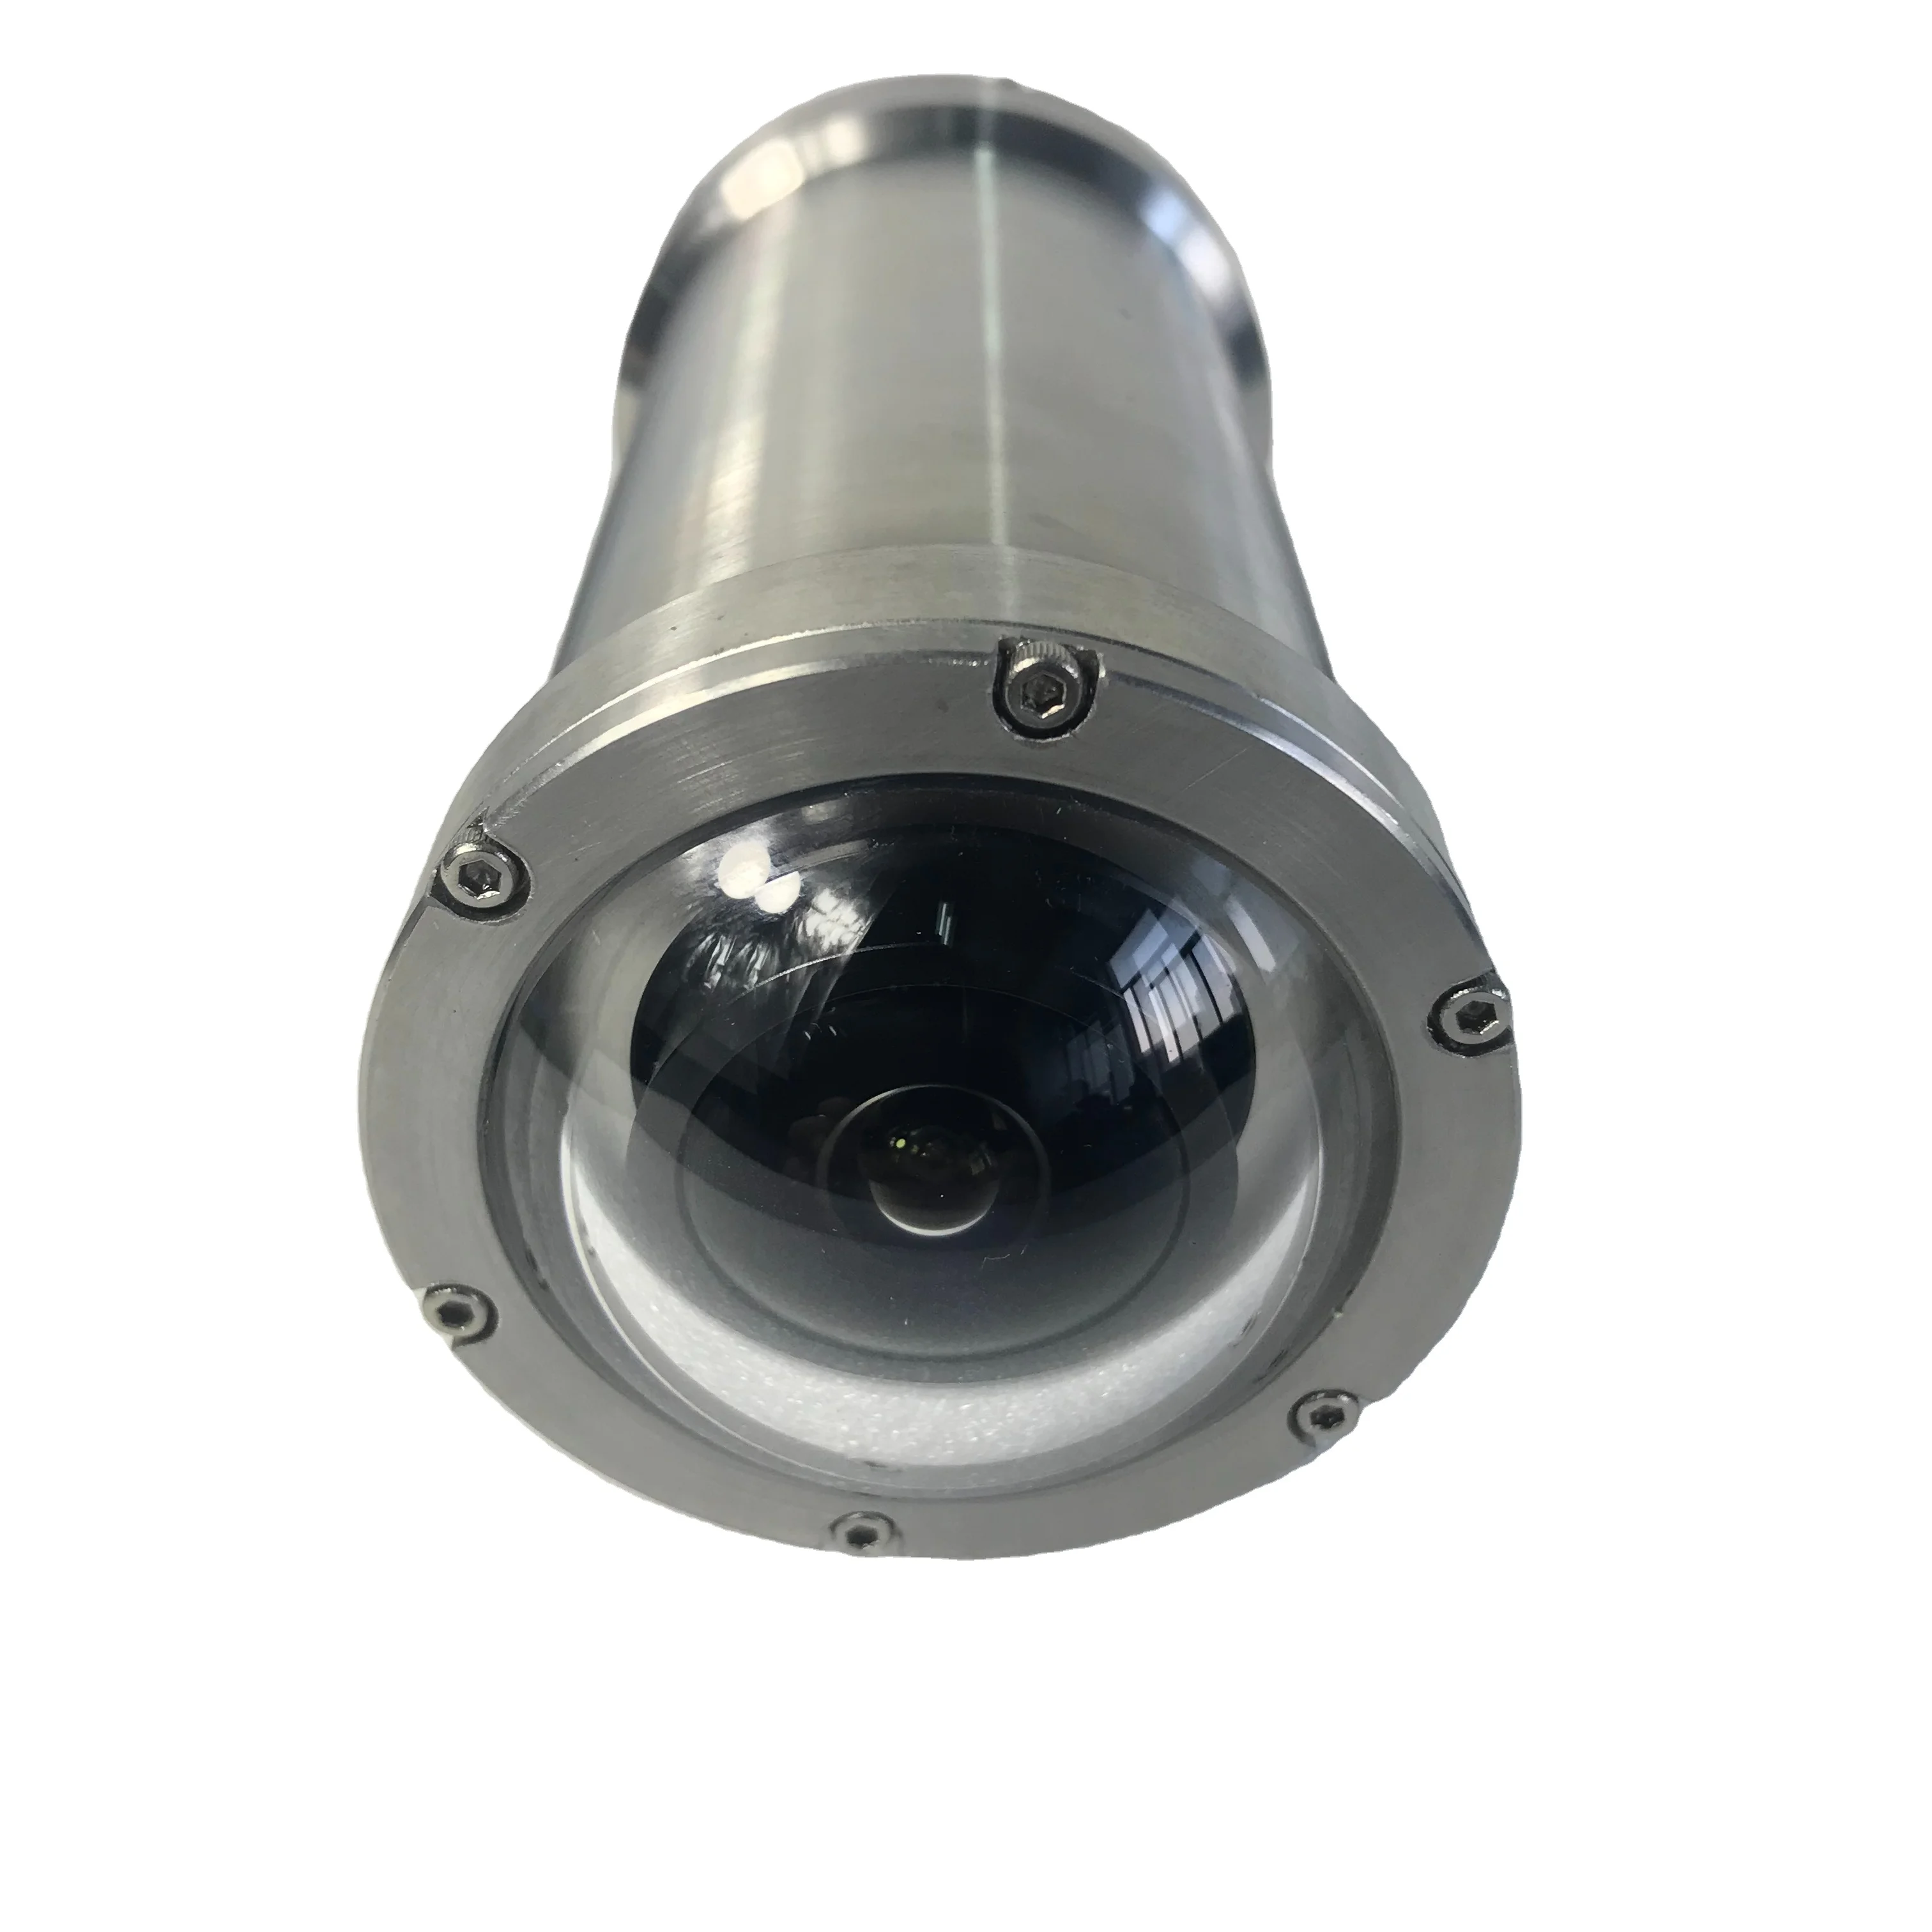 

Direct Wholesale Great Standard Zf-Ipc-07E11 Deep Water Wide Angle Camera